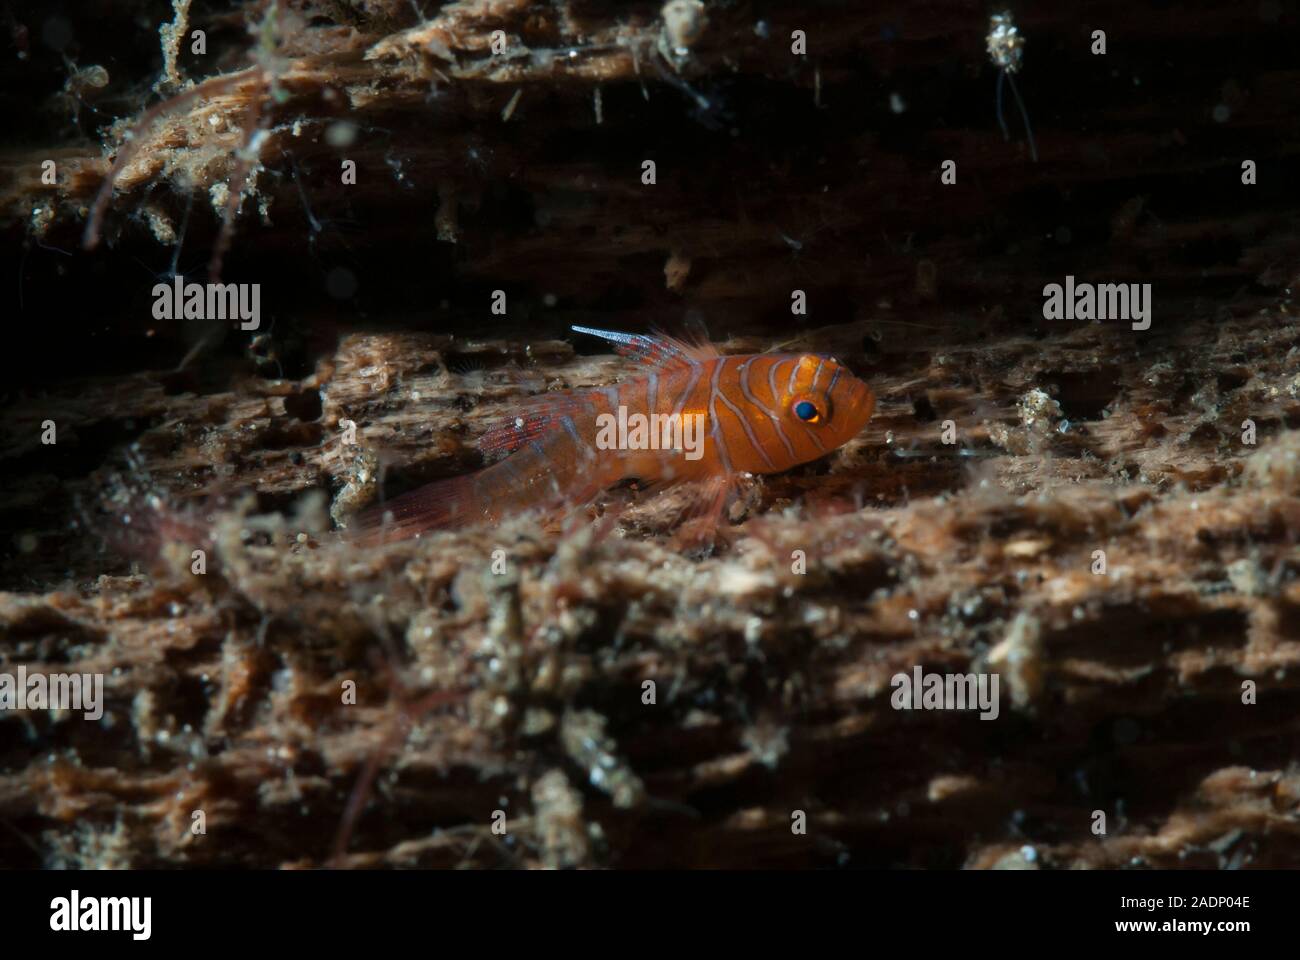 Convict Goby Priolepis sp. Stock Photo